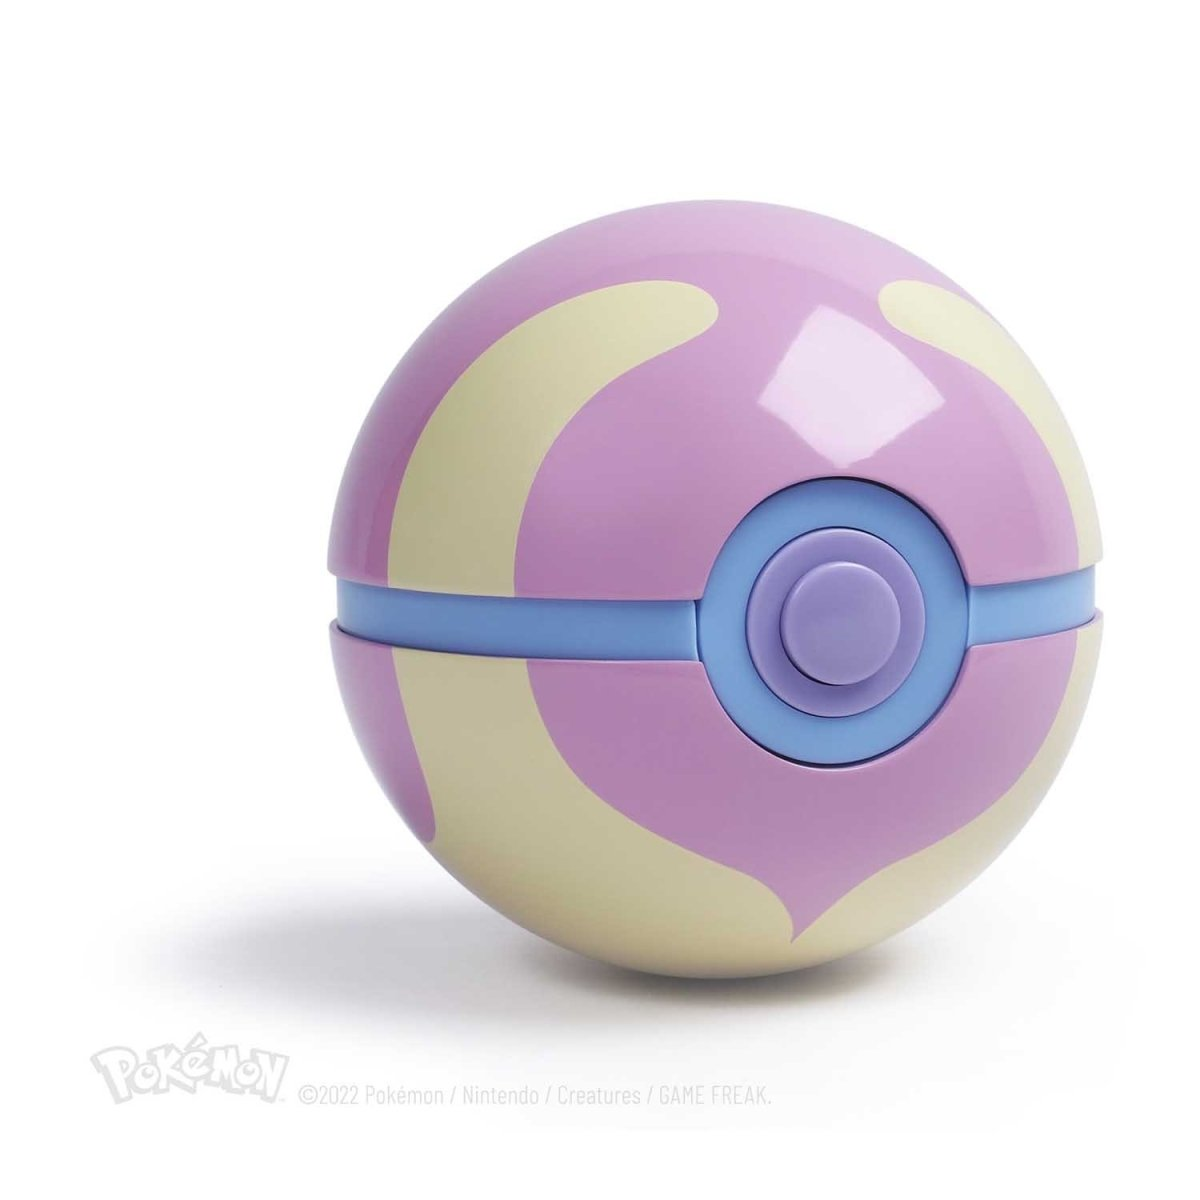 Heal Ball By The Wand Company-Pokemon Centre-Ace Cards & Collectibles